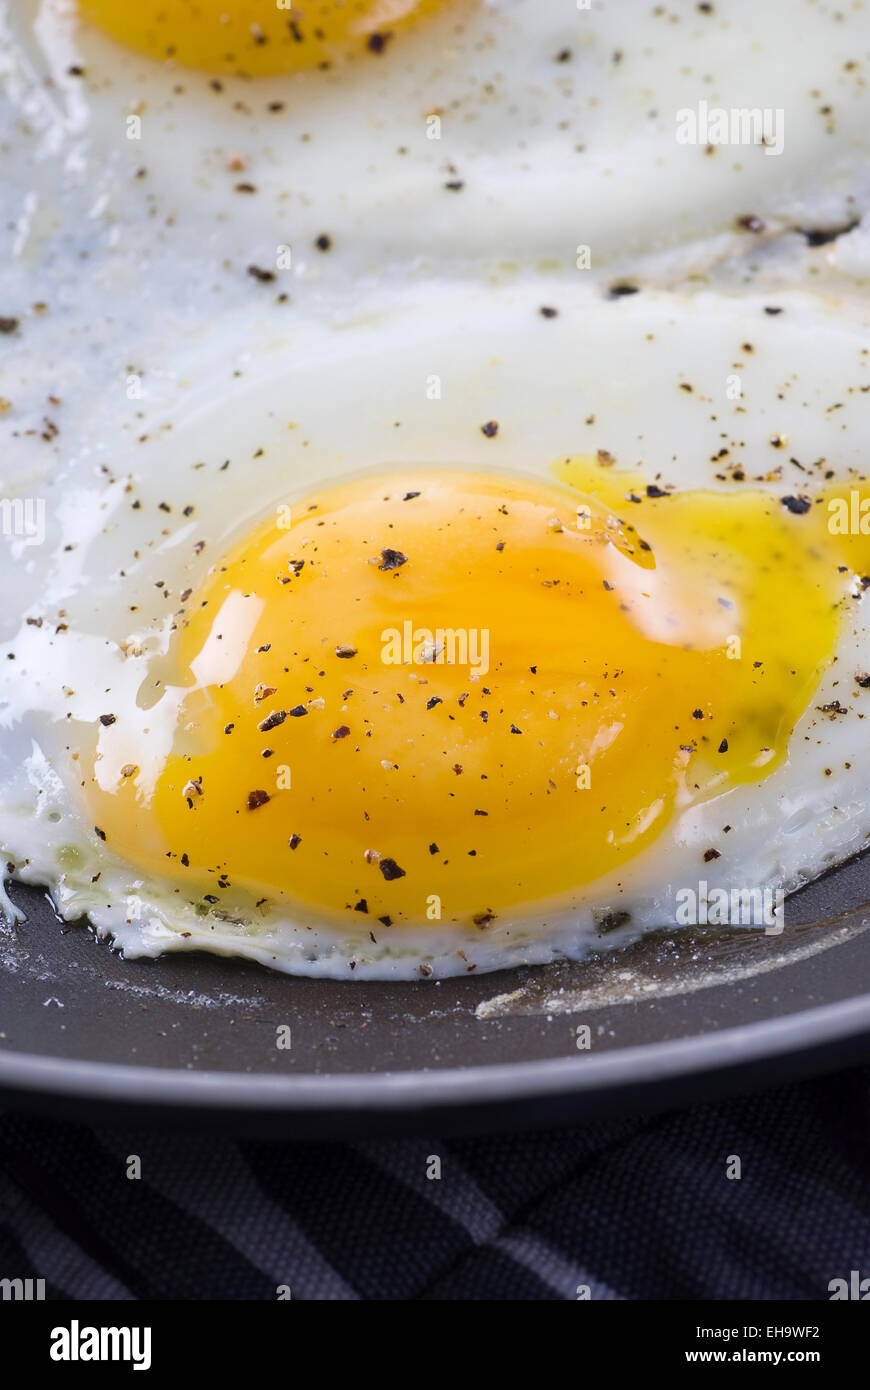 Fried eggs with salt and black pepper. Stock Photo